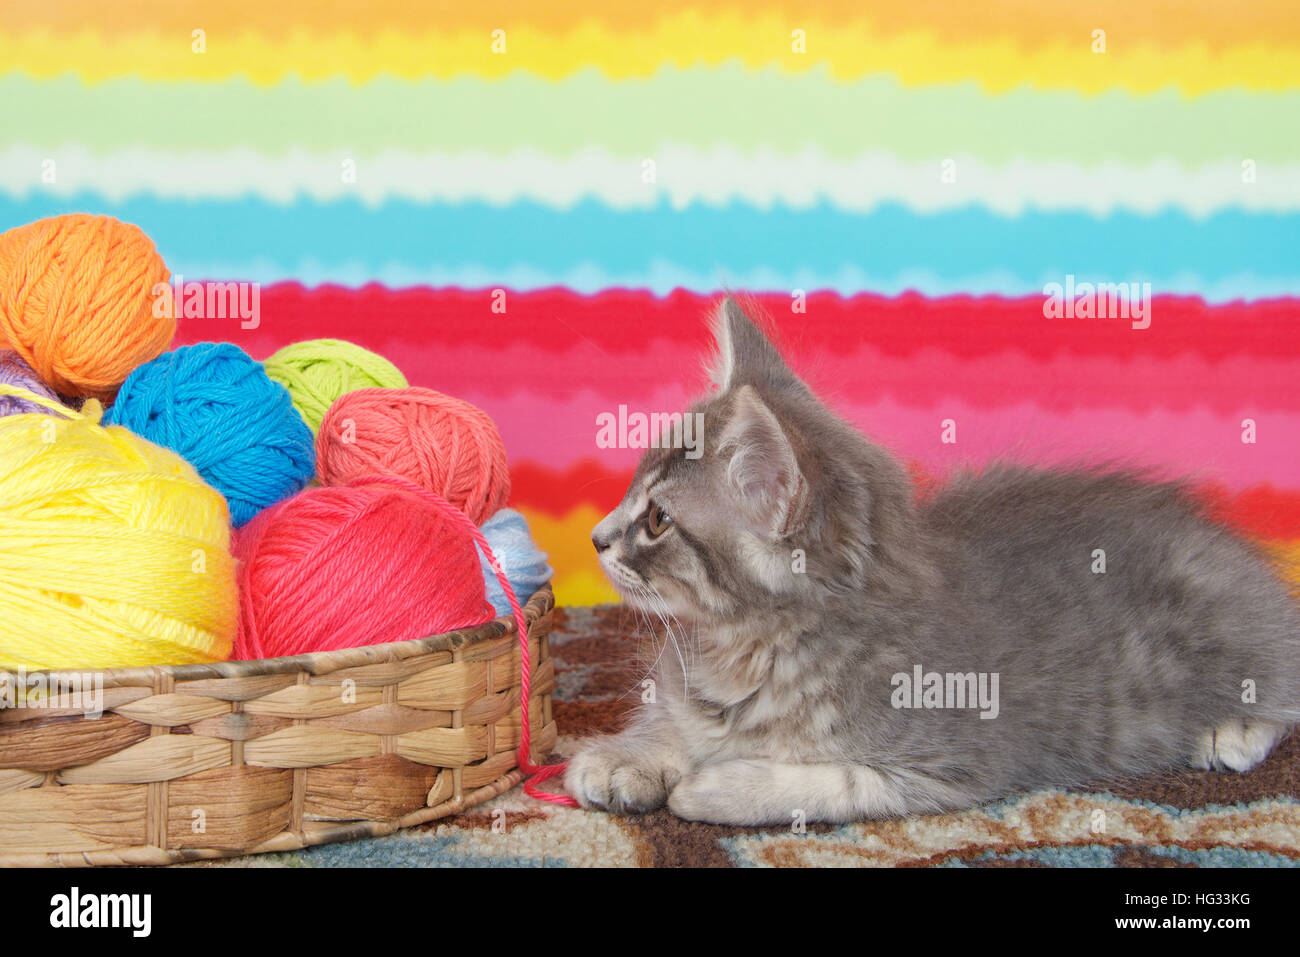 gray long haired tabby kitten laying on colorful carpet floor, bright striped background, balls of yarn in a basket. Stock Photo